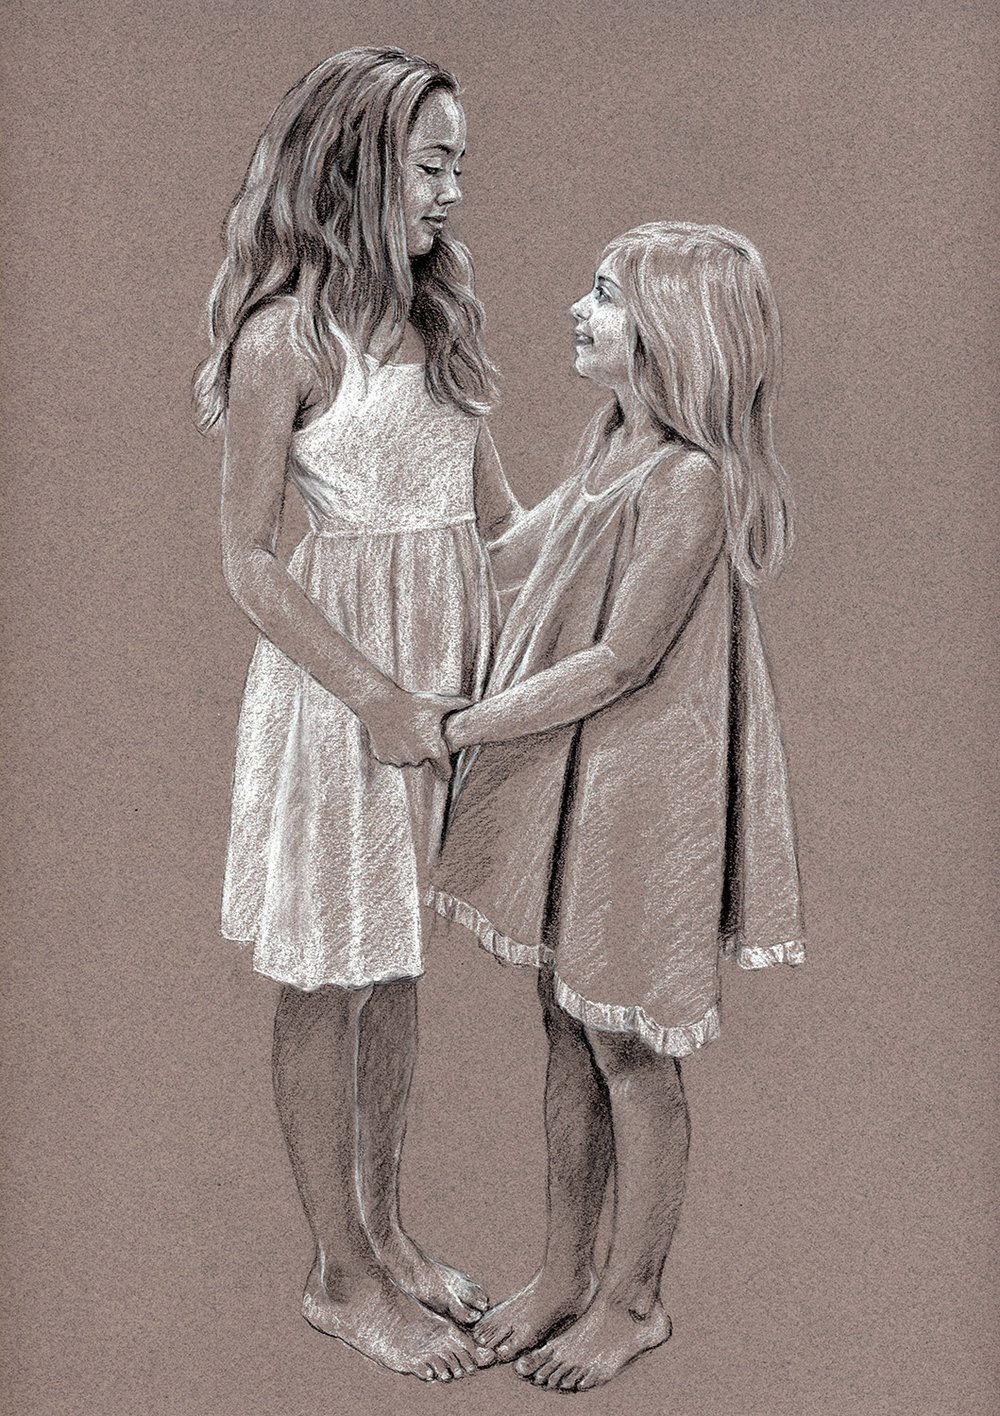 Sketch Of Two Sisters at Explore collection of